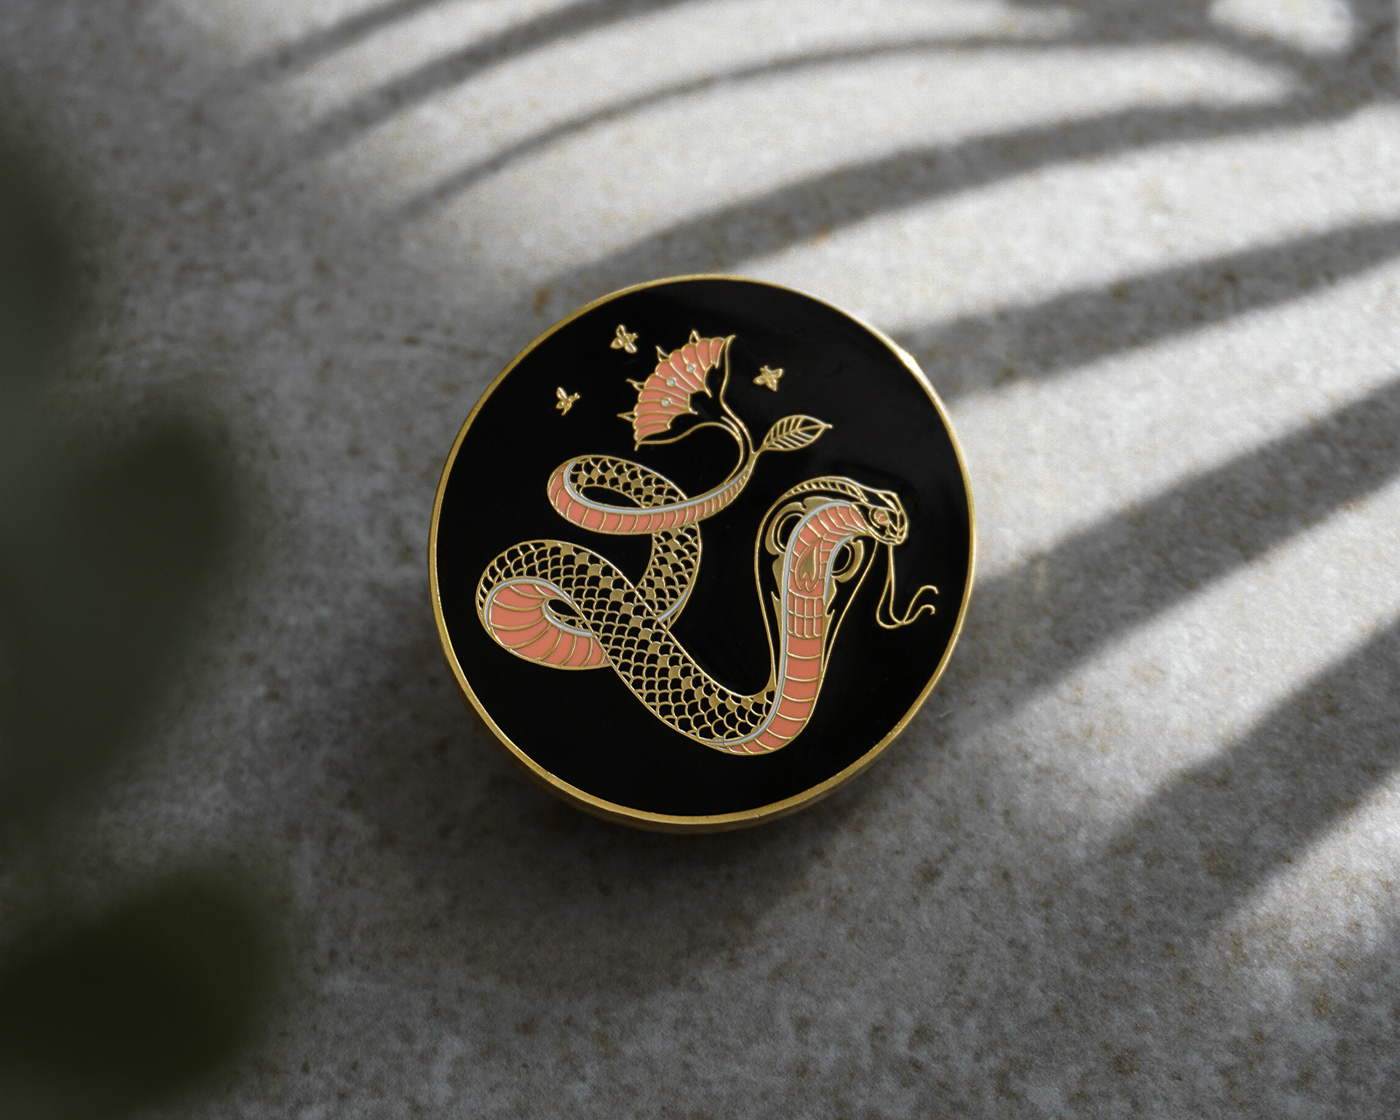 Golden Snake pin by Jared Tuttle